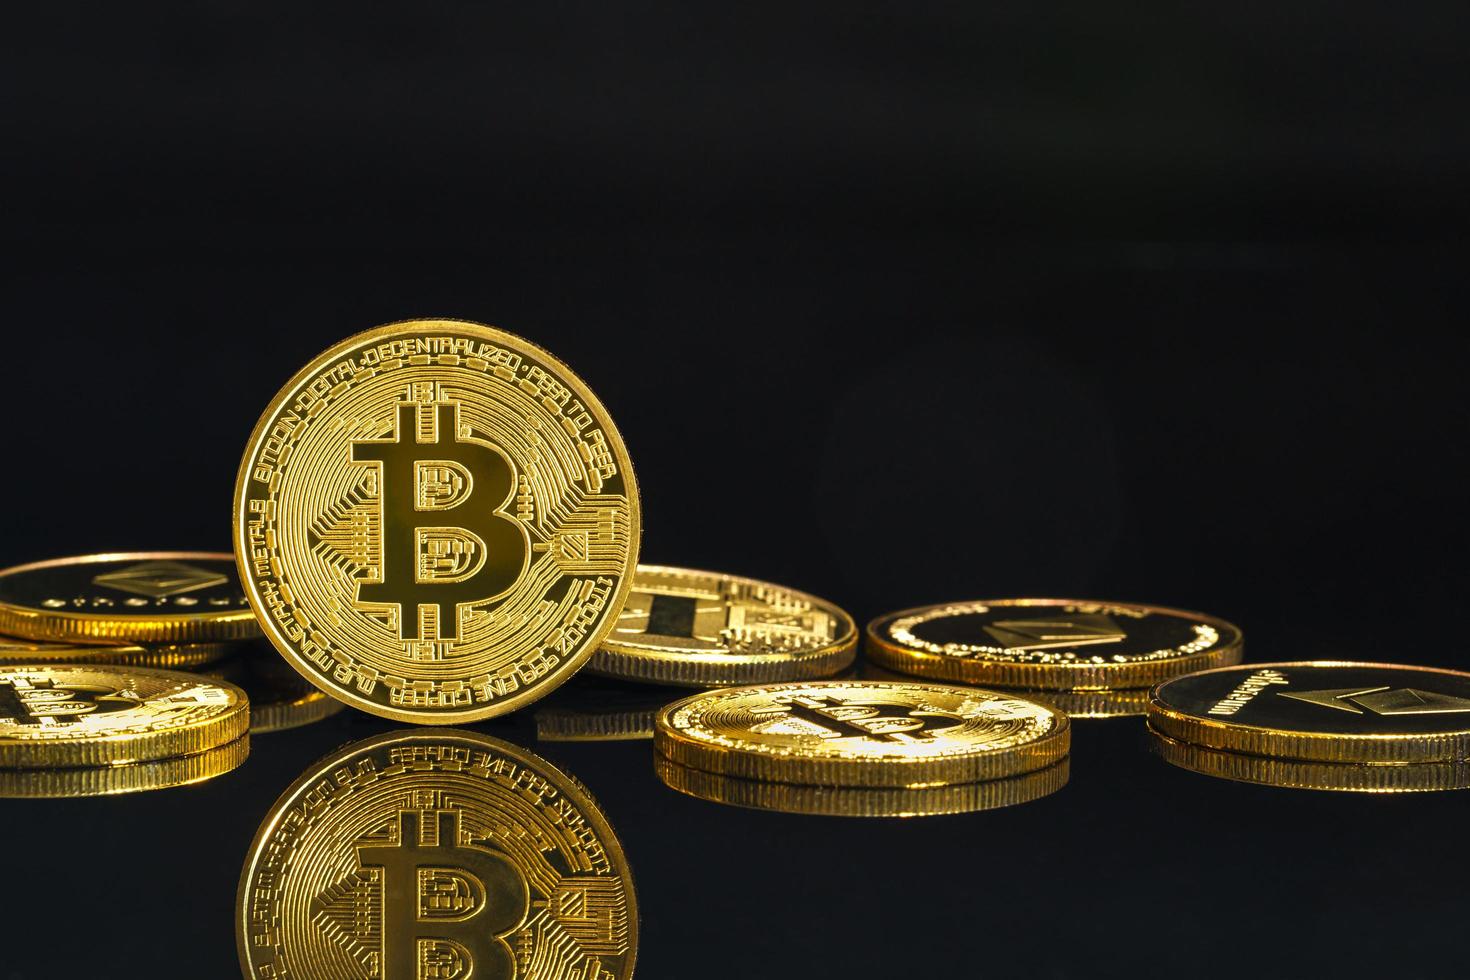 Golden coins with Bitcoin cryptocurrency symbol on black photo